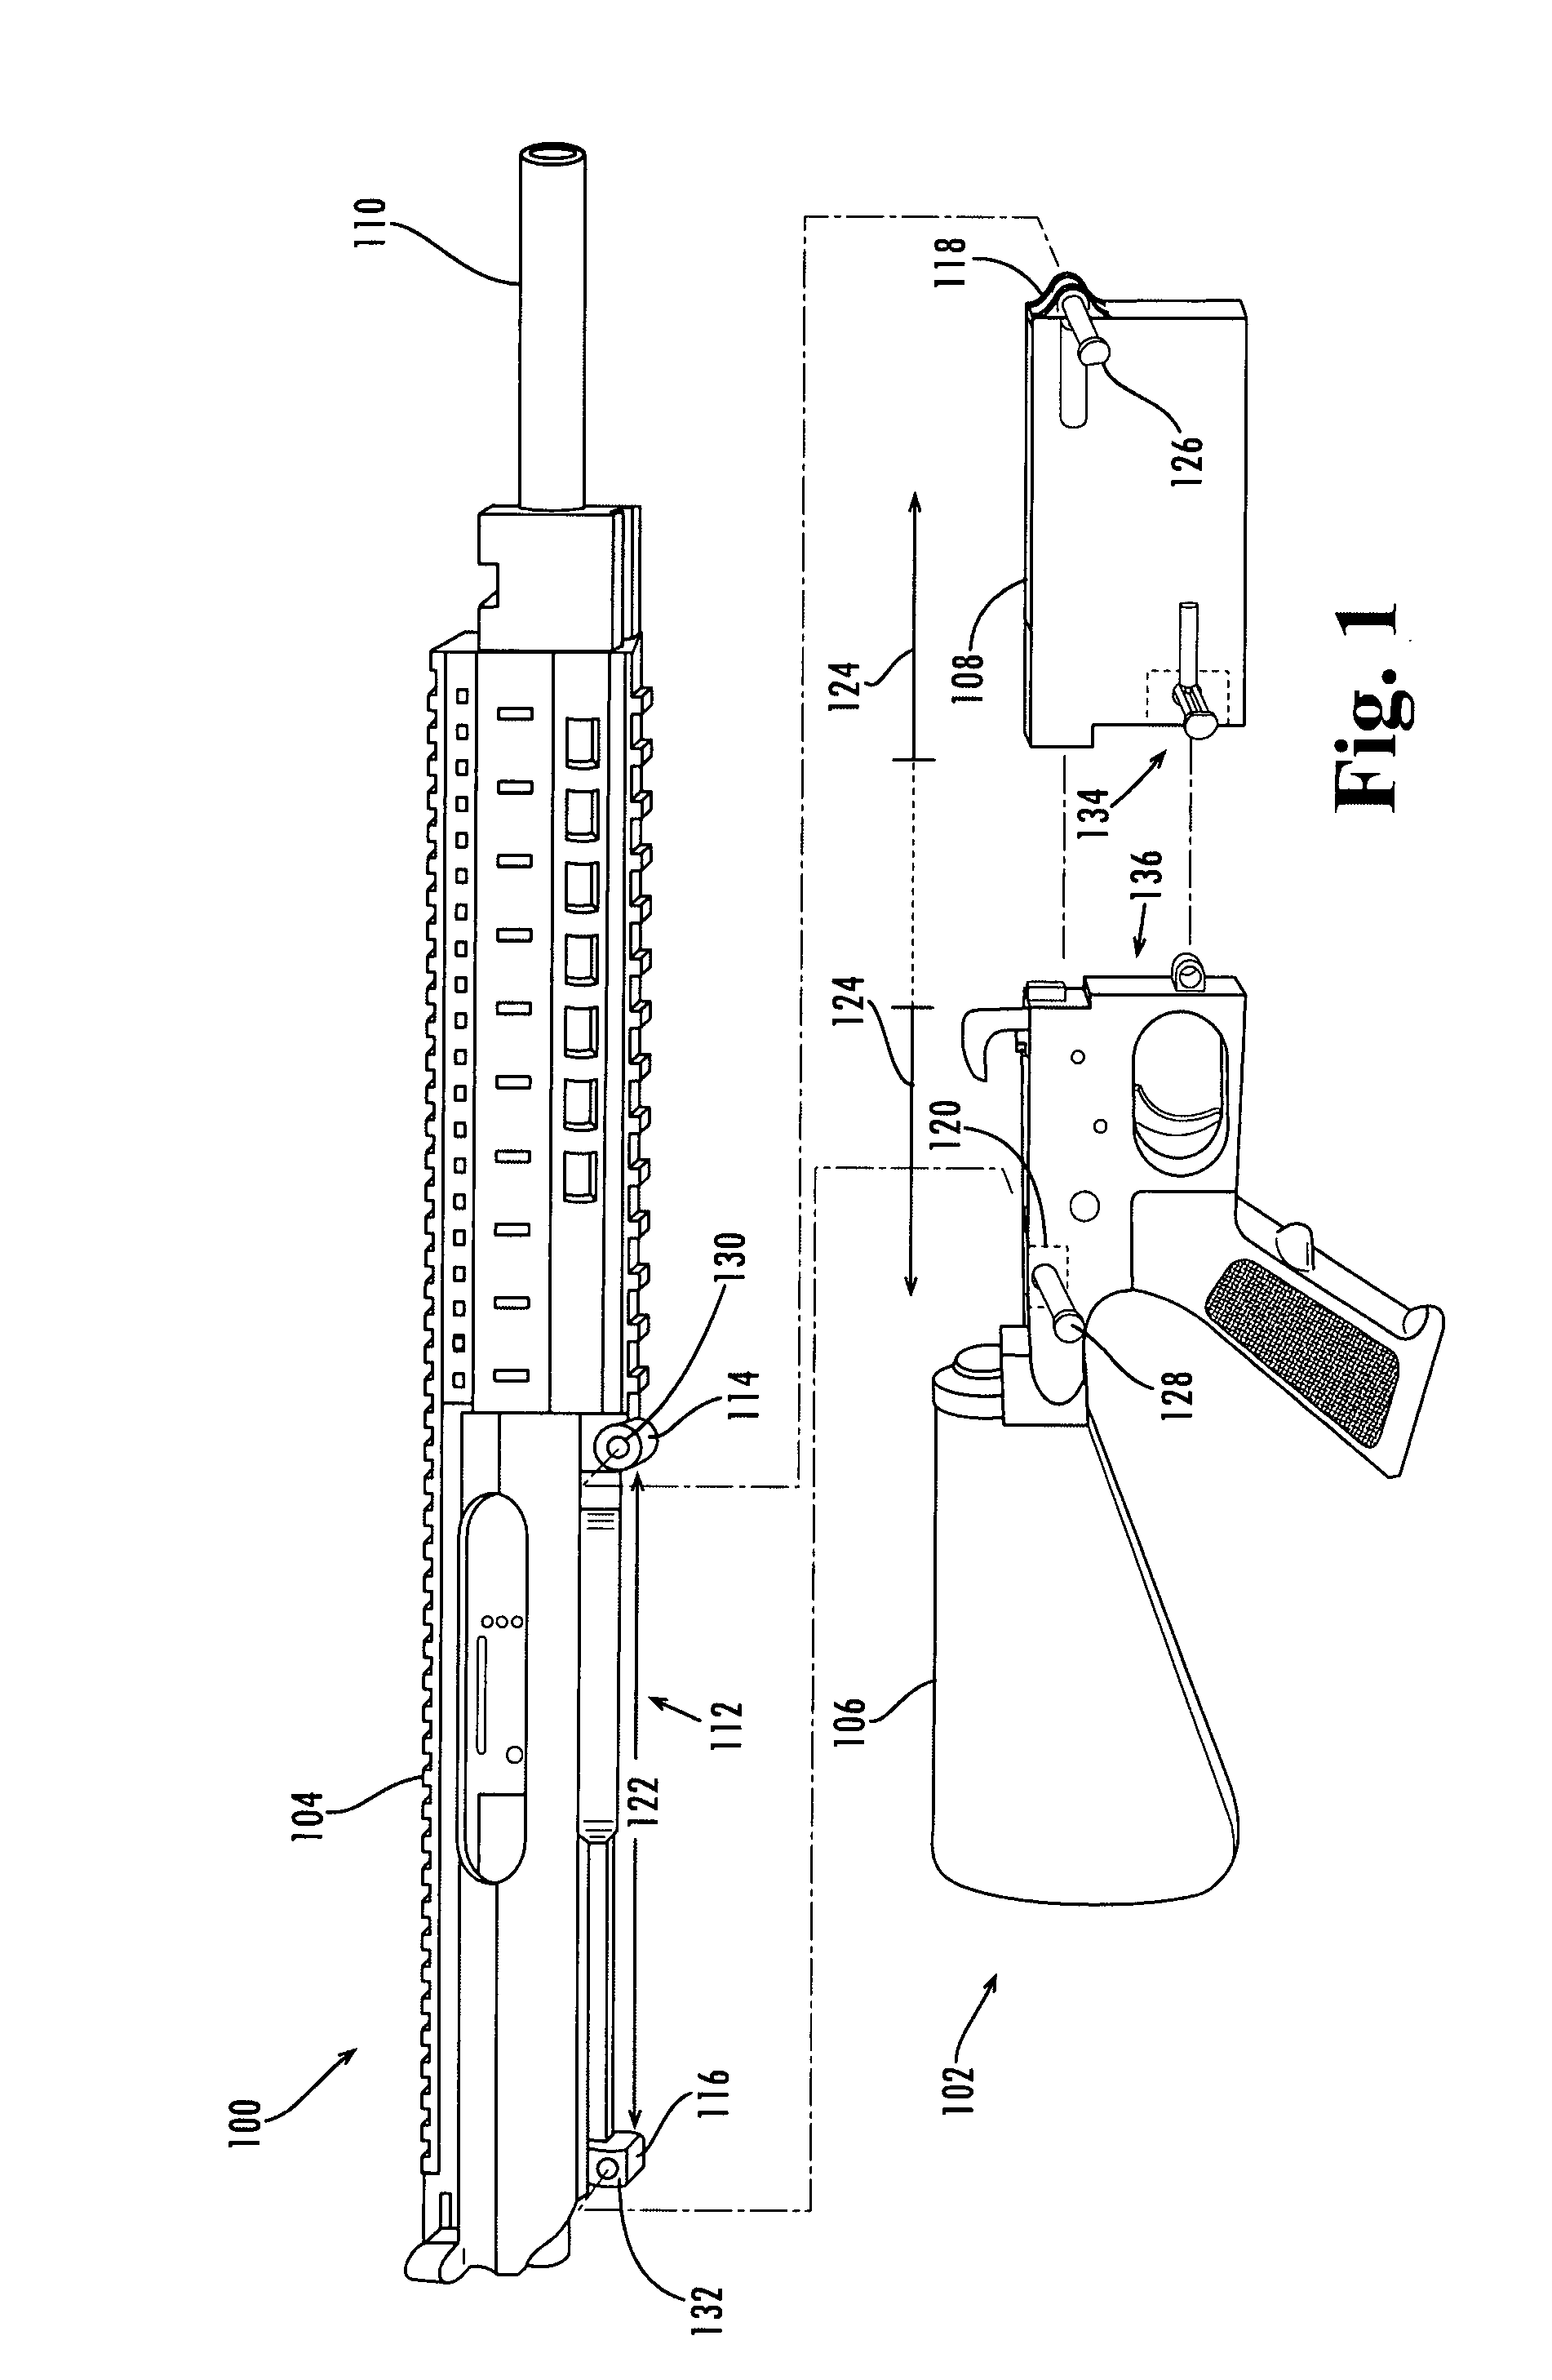 Modular rifle systems and methods